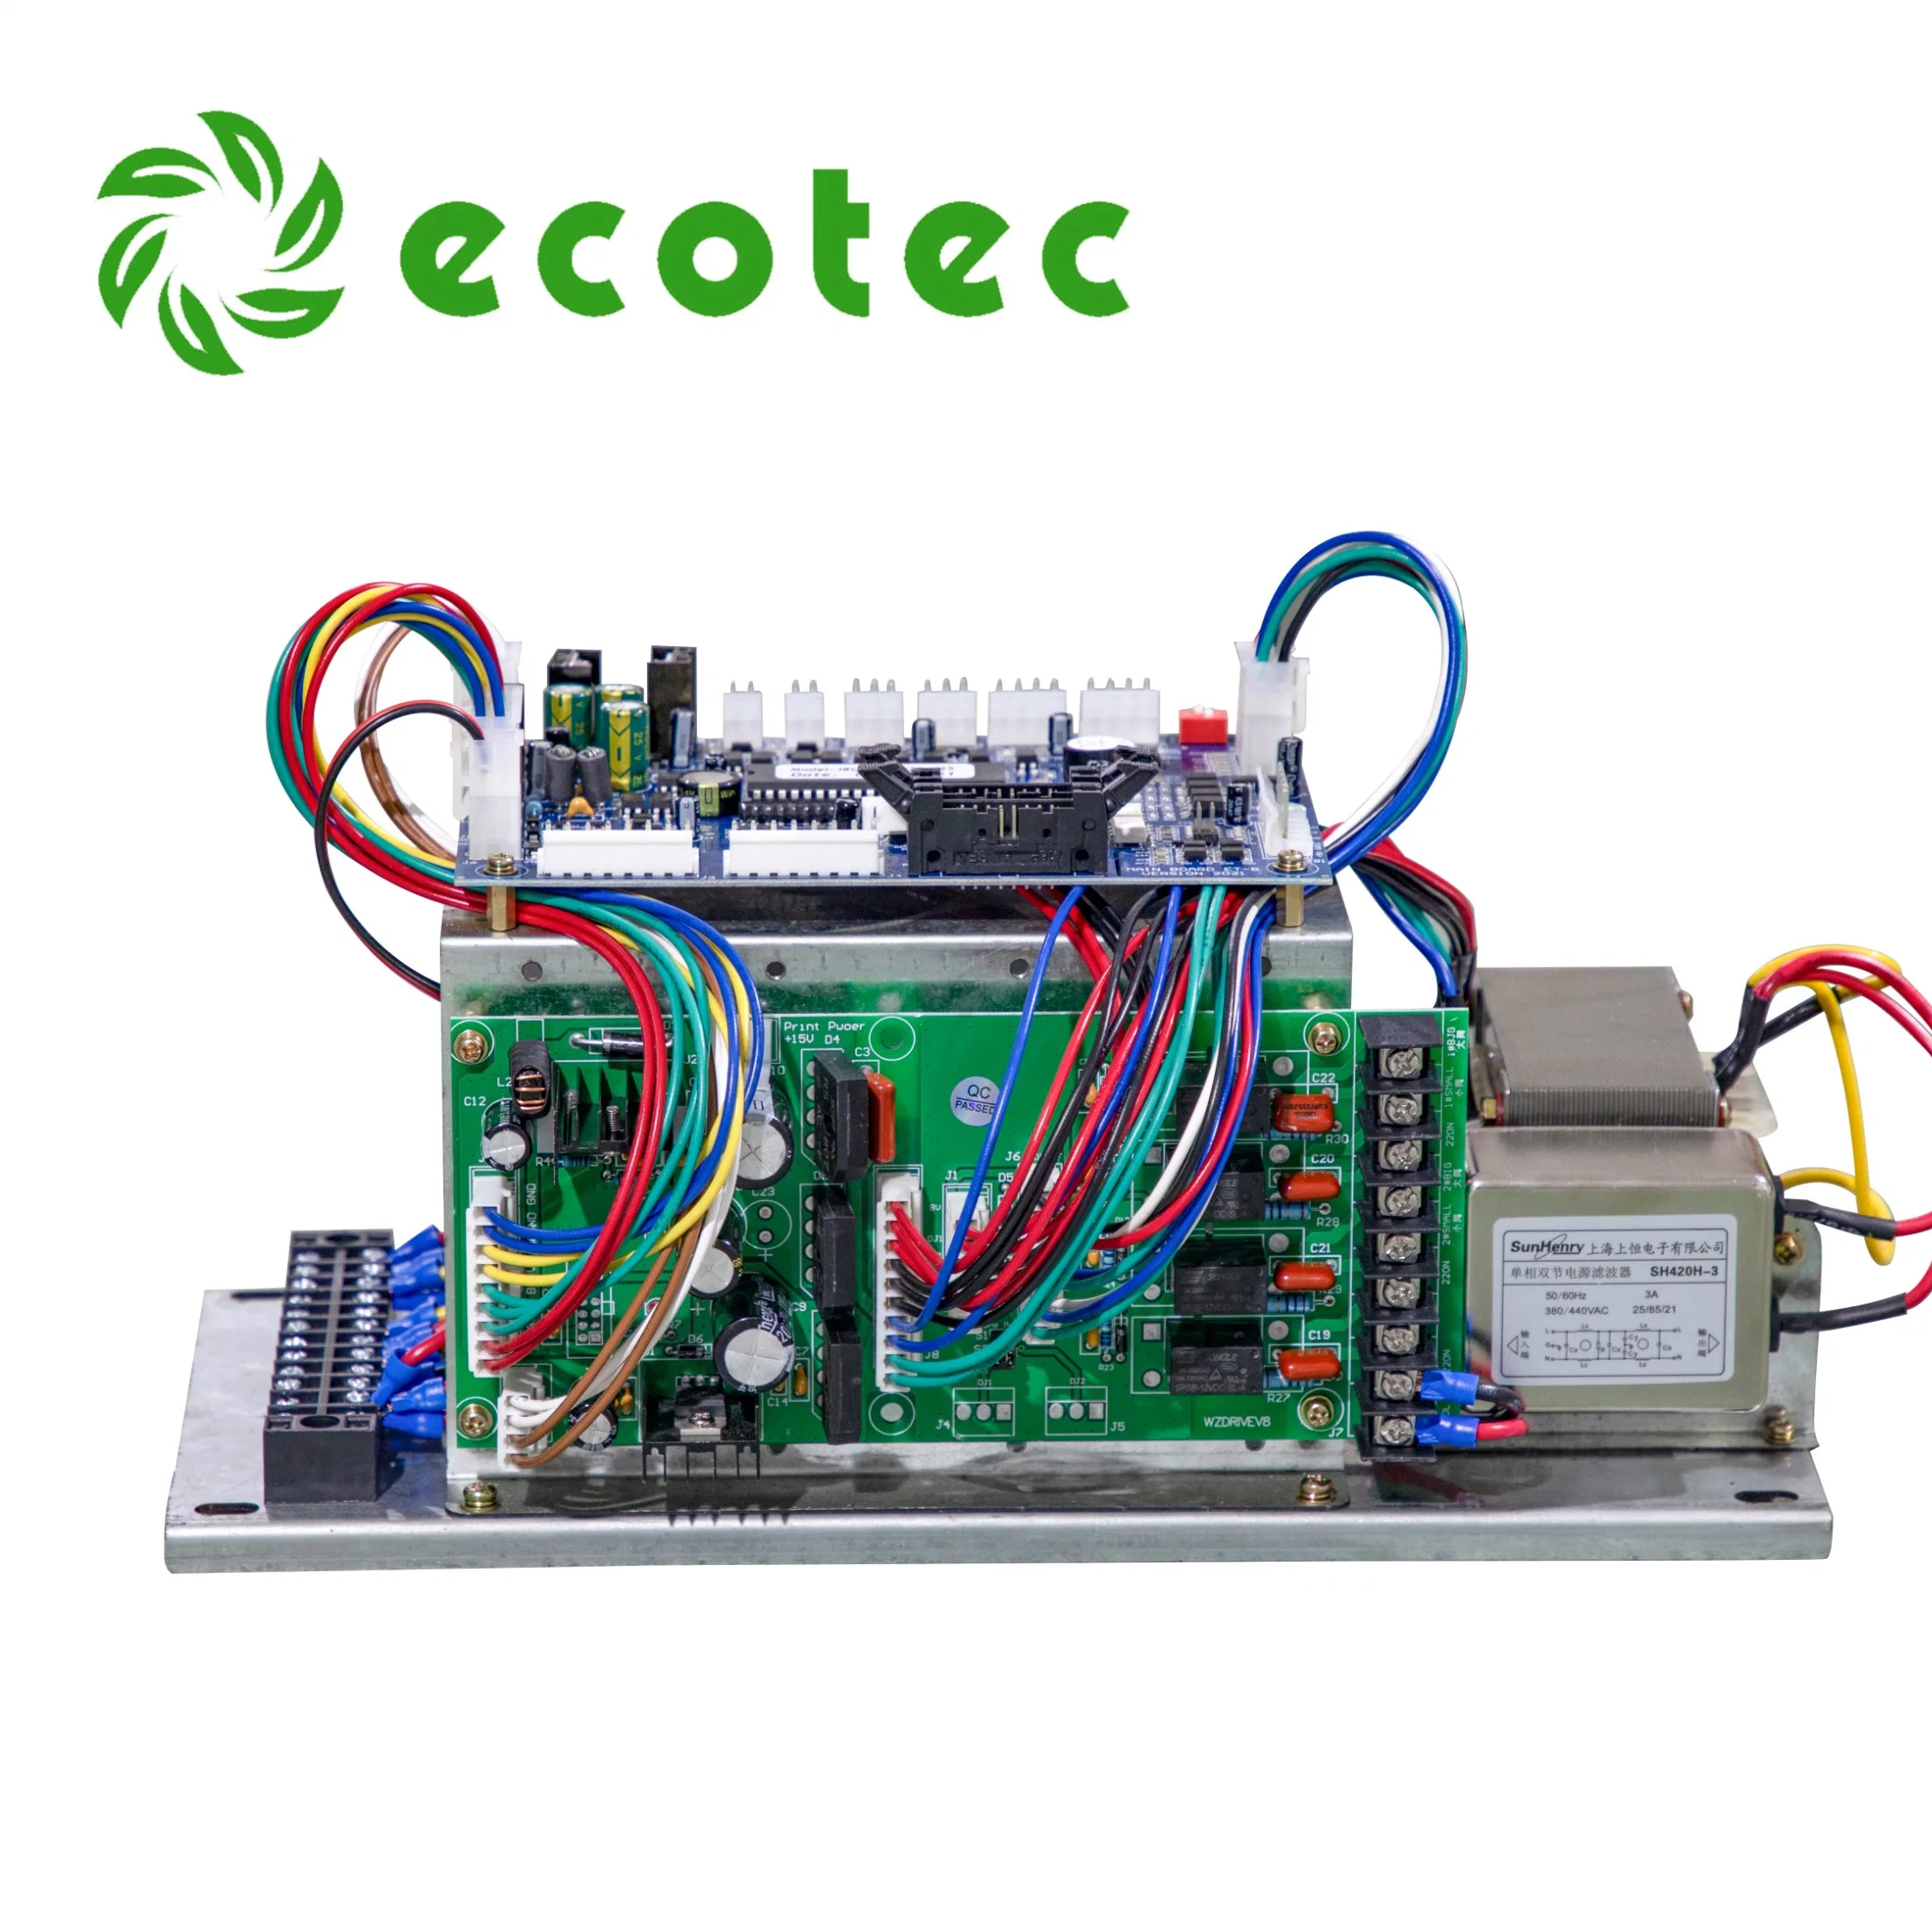 Ecotec Fuel and Gas Equipment Controller System